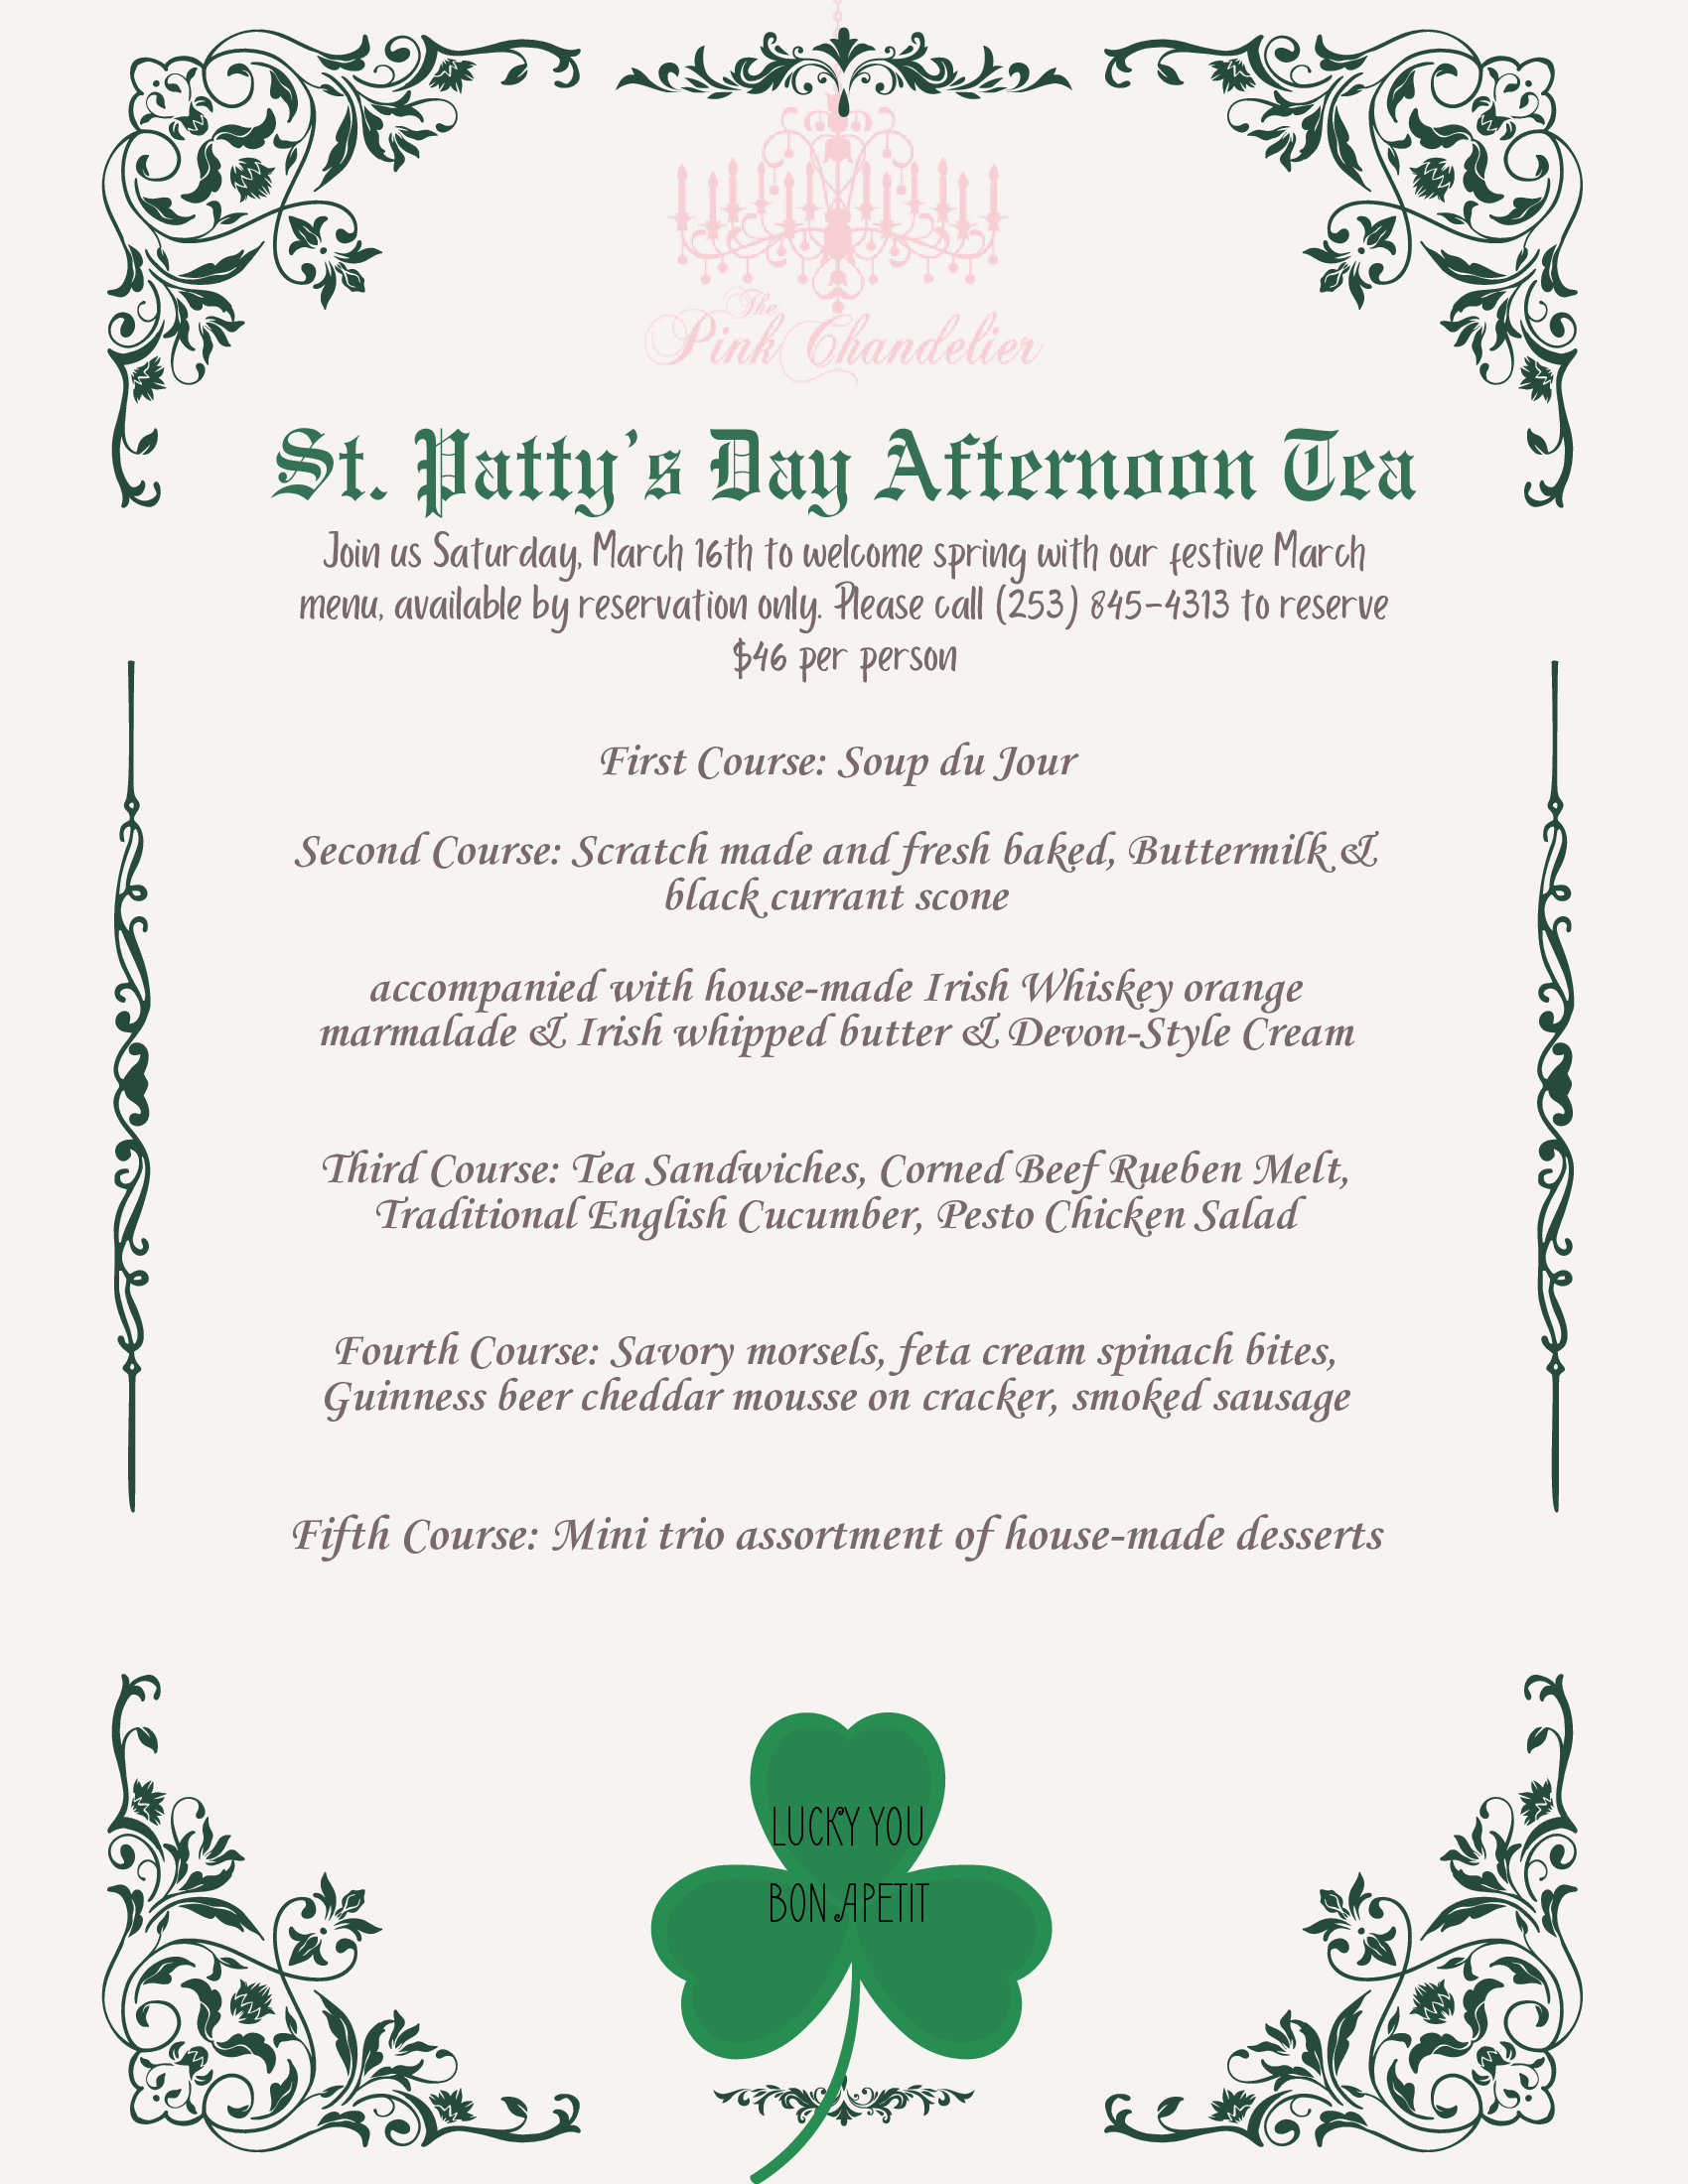 A Menu for St. Patty 's Day Afternoon Tea — Puyallup, WA — The Pink Chandelier